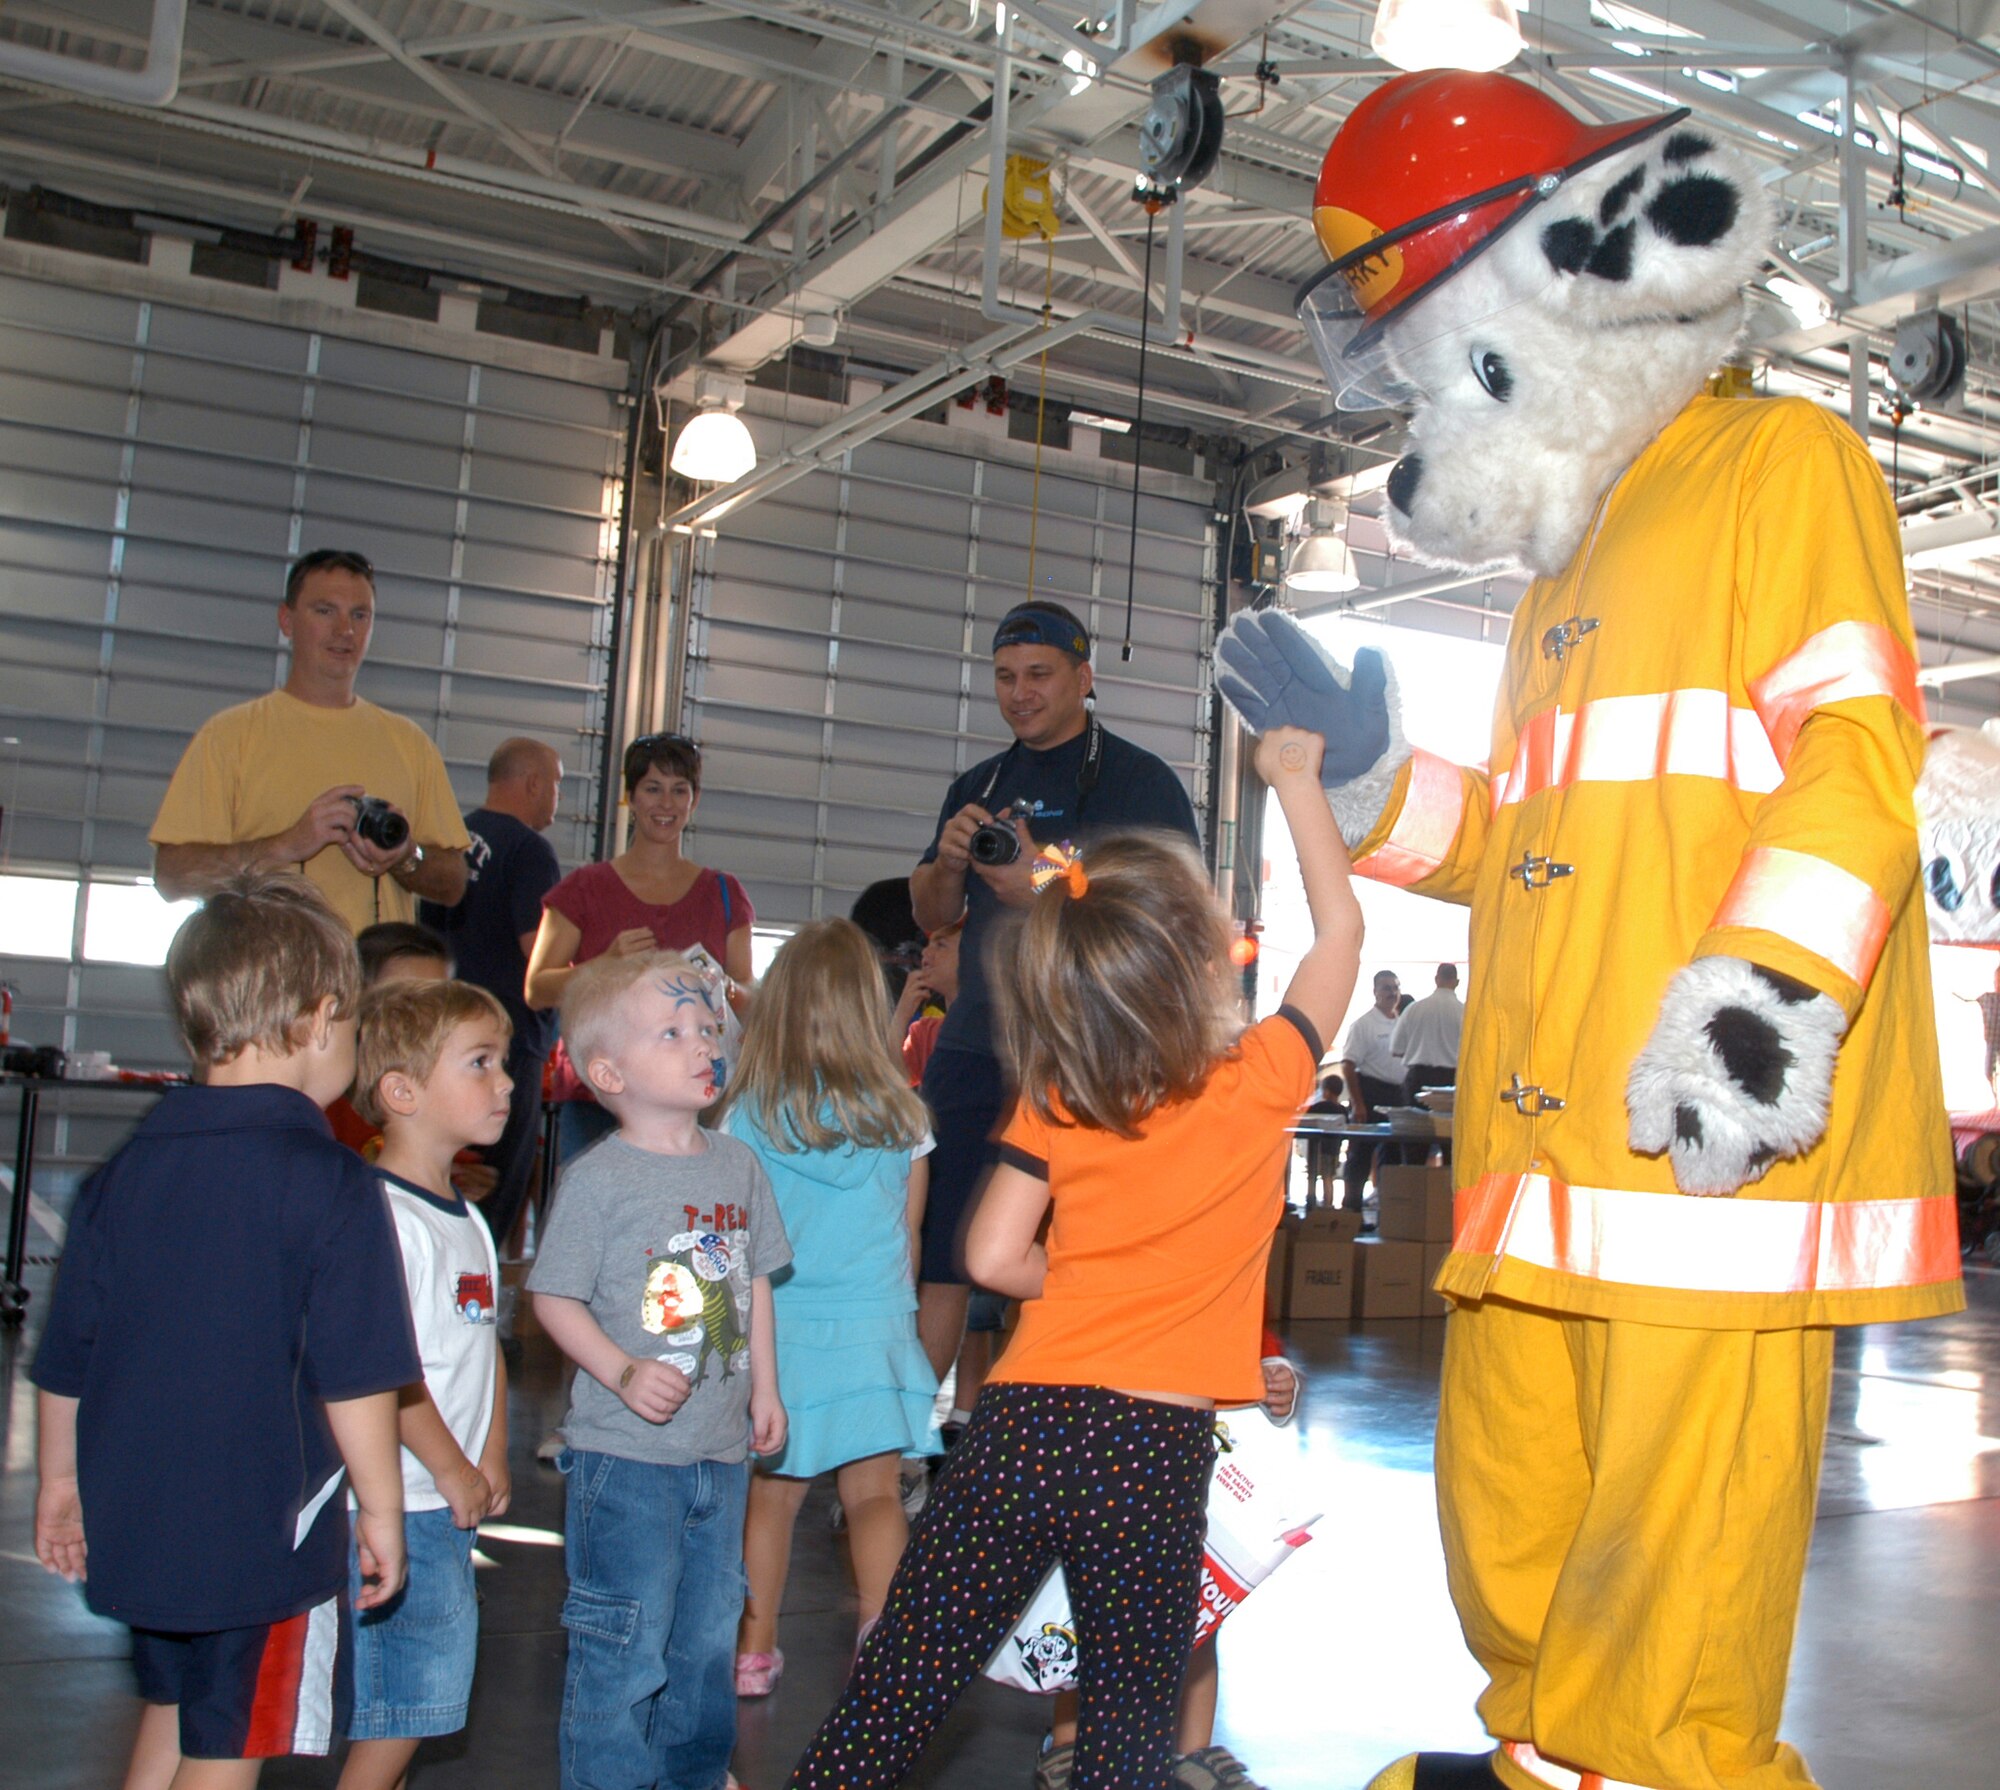 OFFUTT AIR FORCE BASE, Neb. -- Children received a visit from Sparky the fire dog during the 2008 Offutt Firestation Open House. Sparky would walk around and tell the children fire safety tips. Children also enjoyed a bounce house to jump on as well as various fire training drills for children offered by the Offutt firefighters. Oct. 11. (U.S. Air Force Photo By Jeff Gates)                                                                                                                                                              